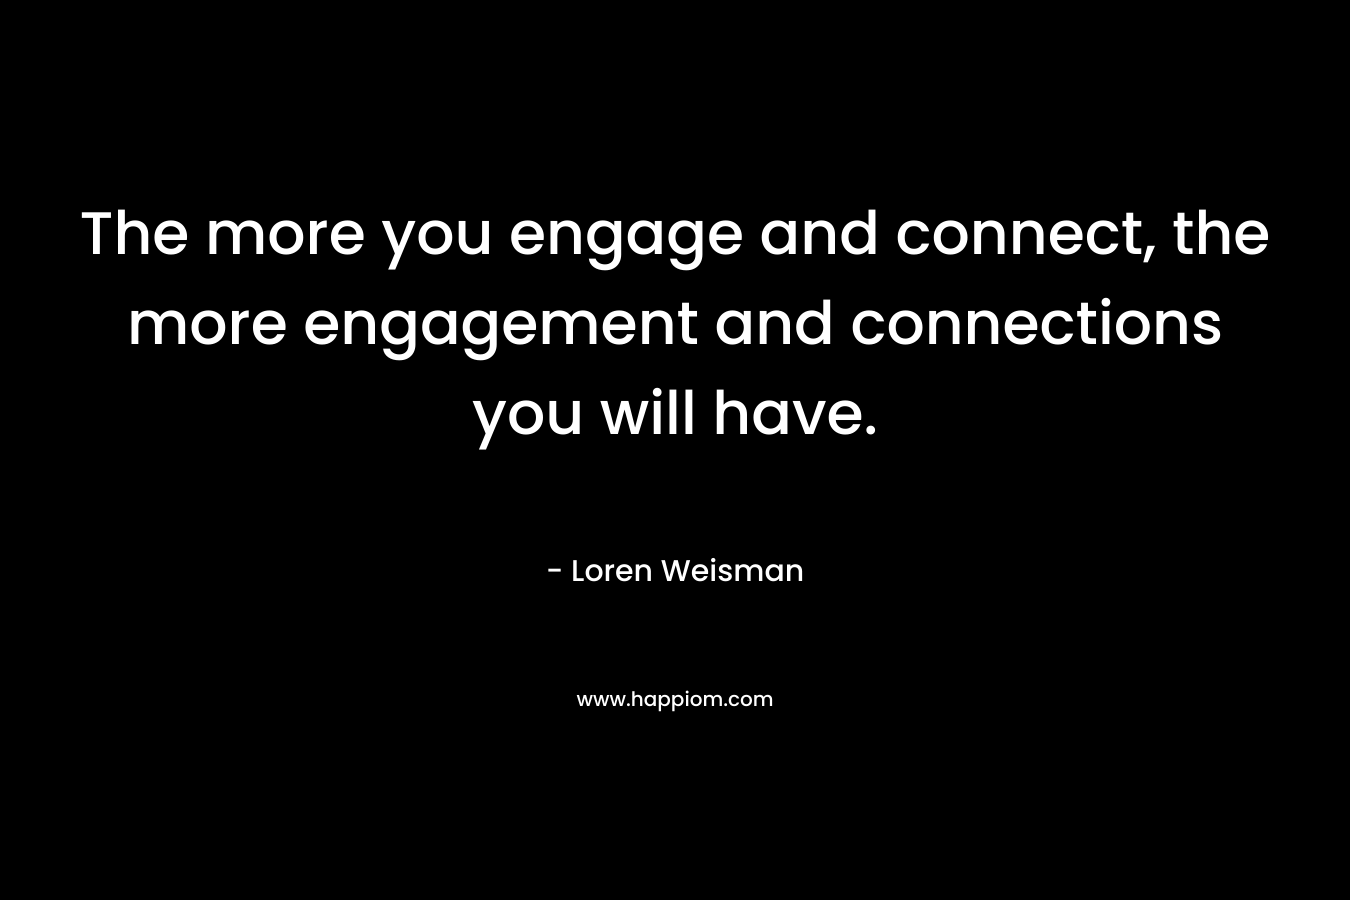 The more you engage and connect, the more engagement and connections you will have. – Loren Weisman